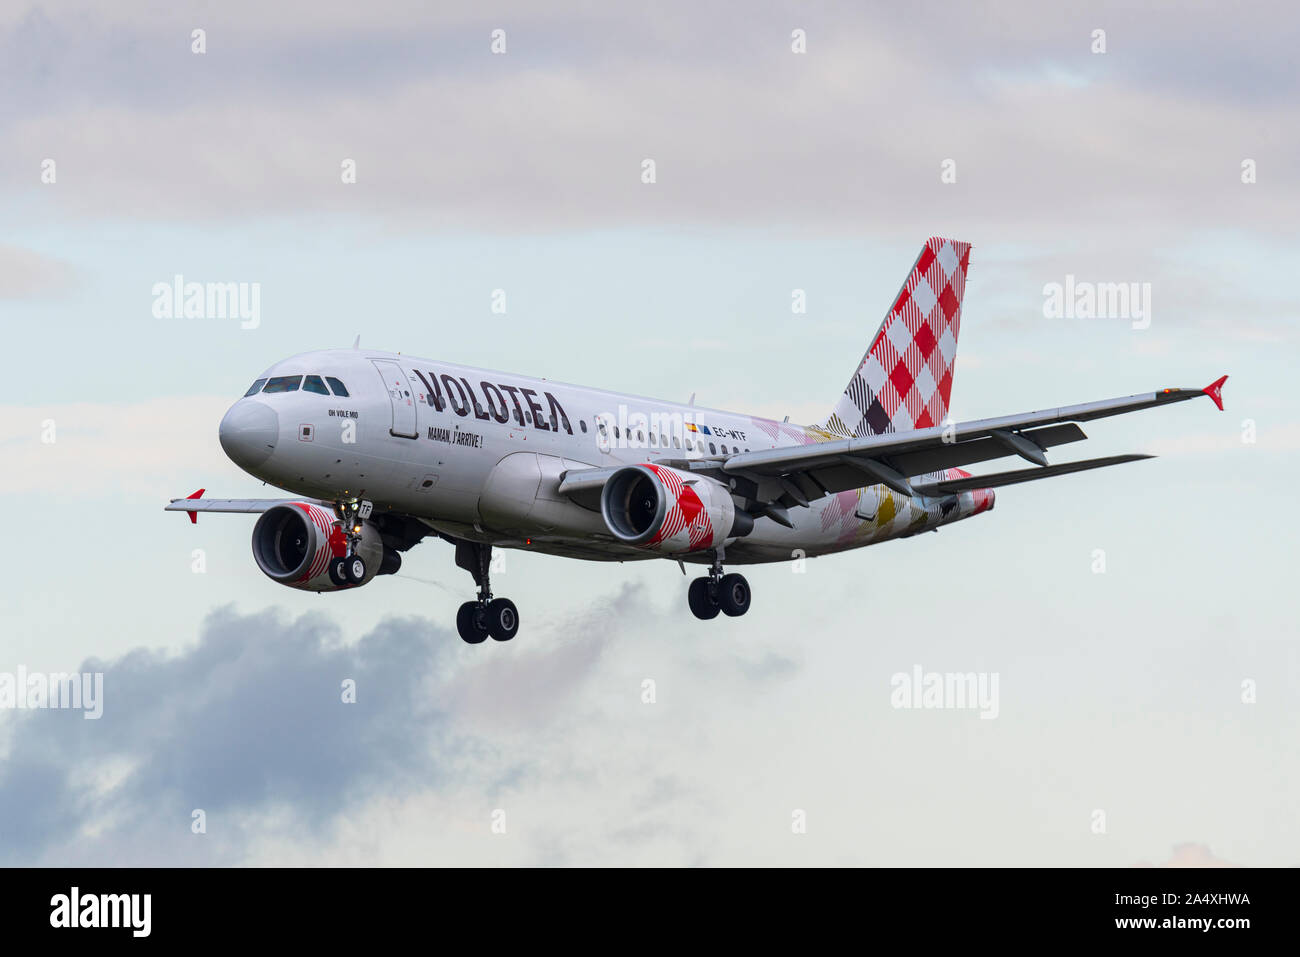 Volotea Airbus A319 jet airliner plane EC-MTF landing at London Southend Airport, Southend on Sea, Essex, UK. Spanish budget airline Stock Photo